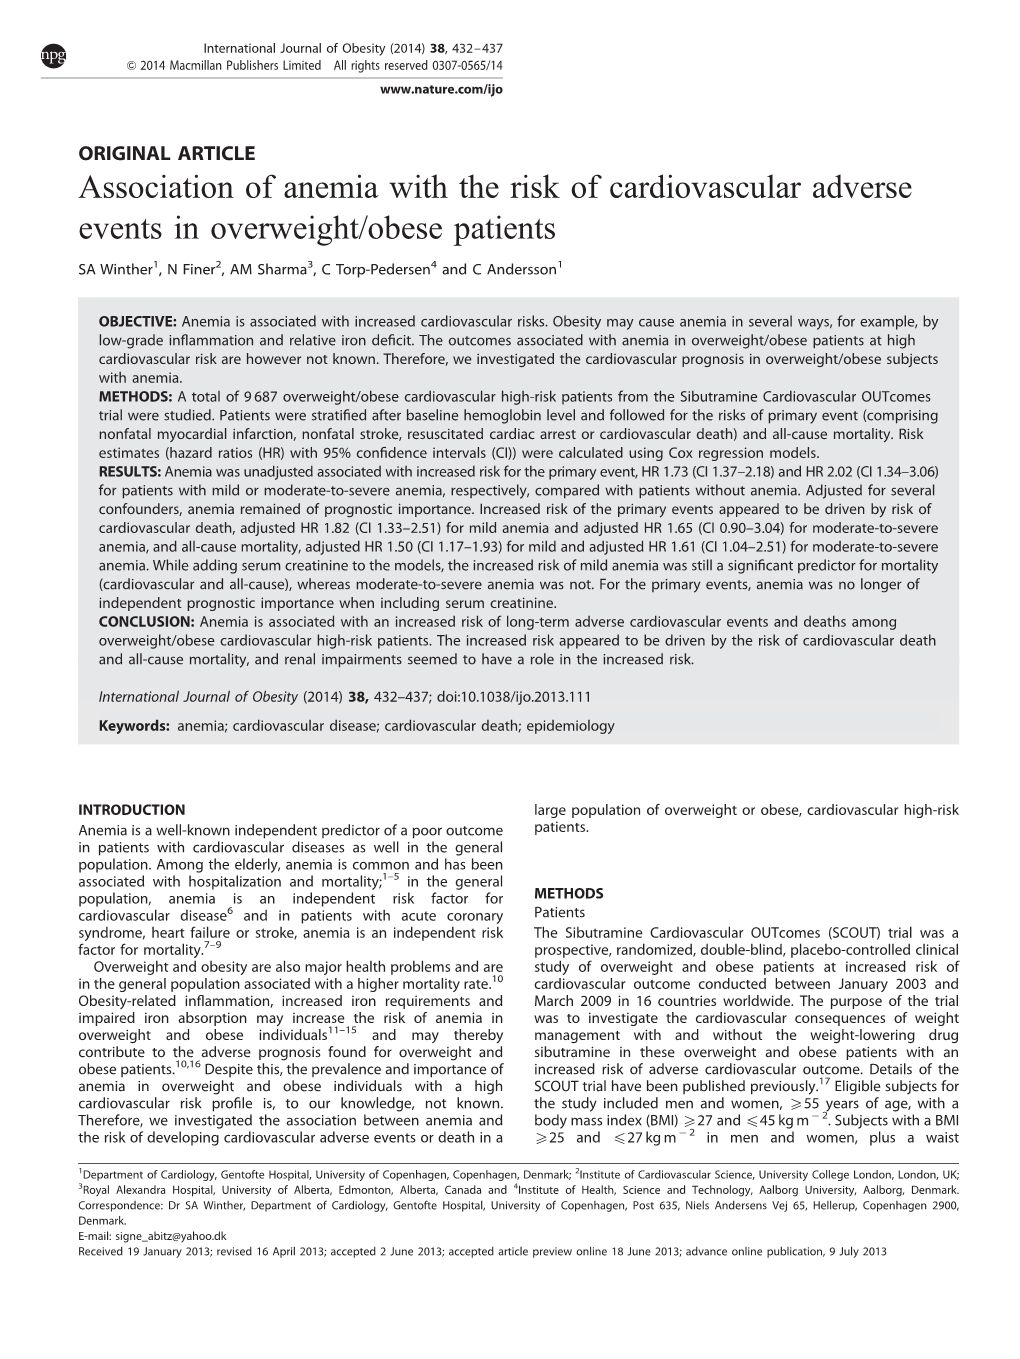 Association of Anemia with the Risk of Cardiovascular Adverse Events in Overweight/Obese Patients